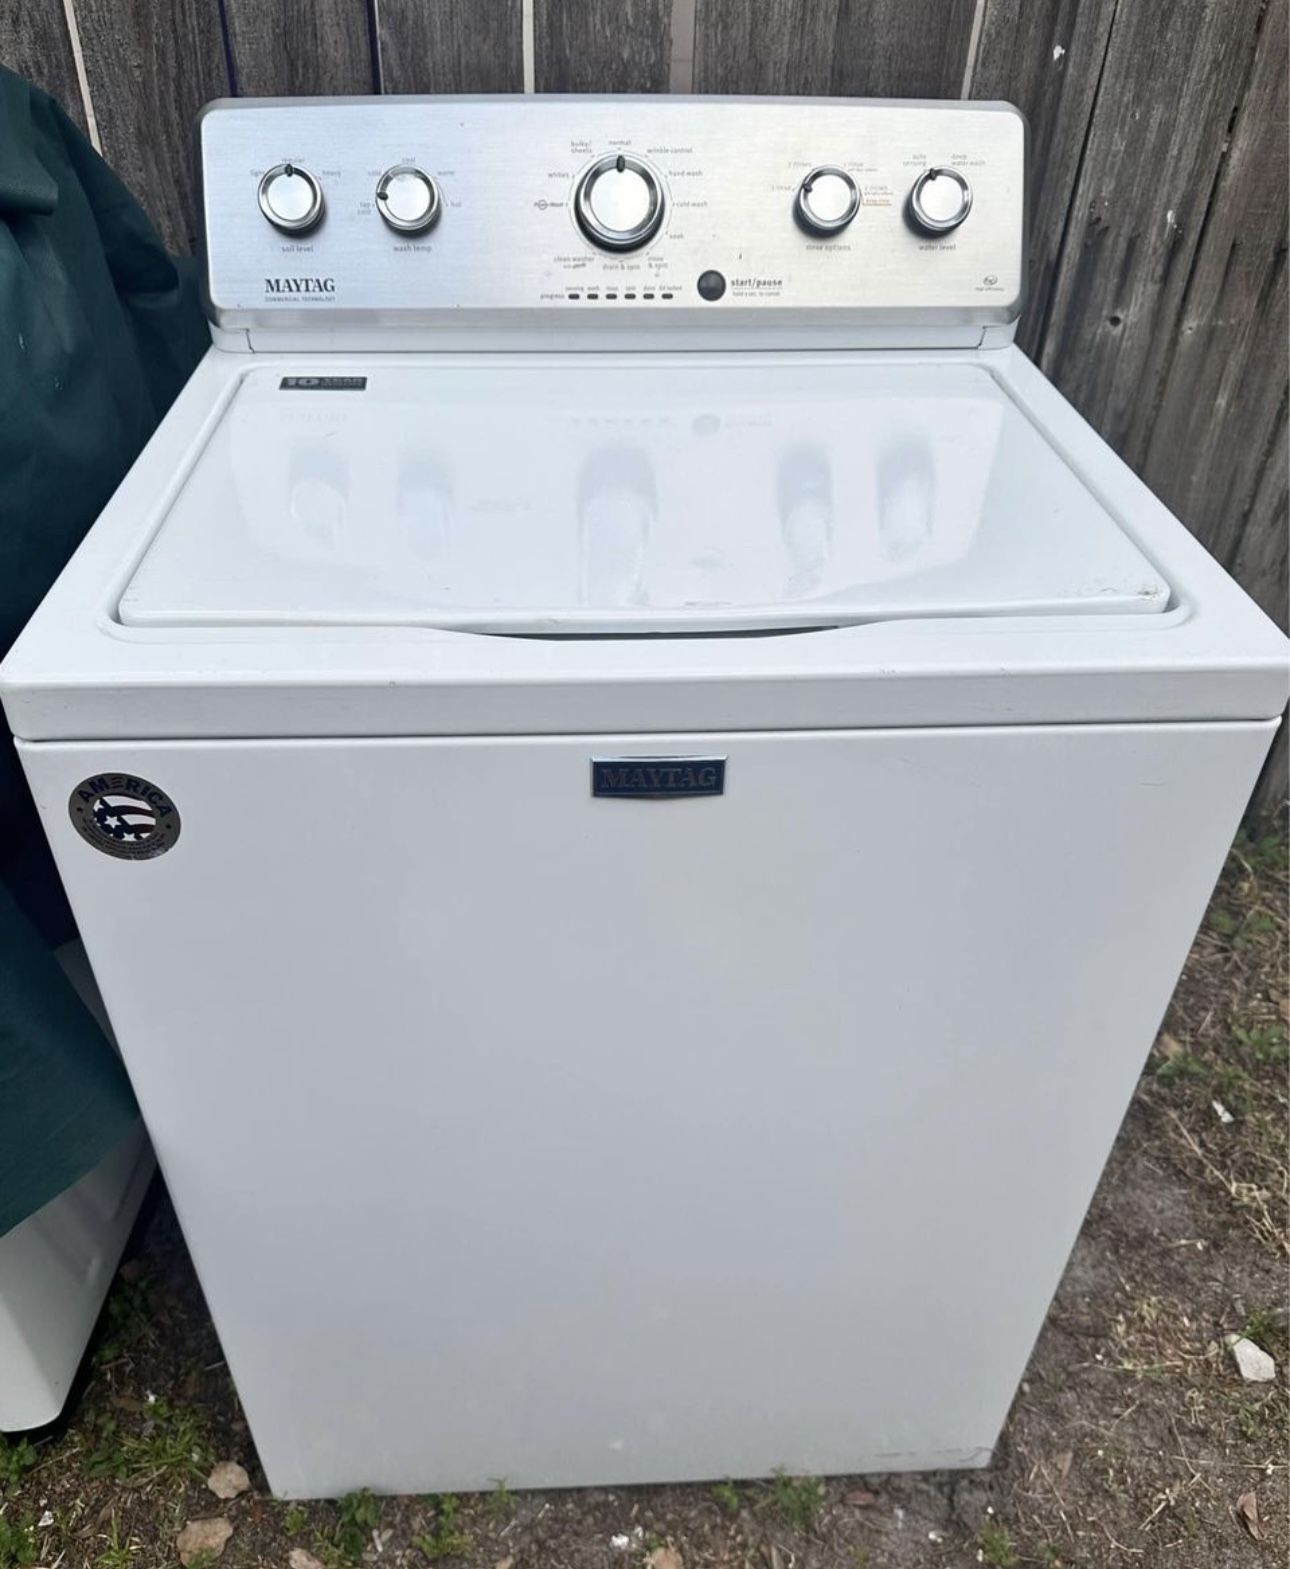 Washer Maytag For Sale !!